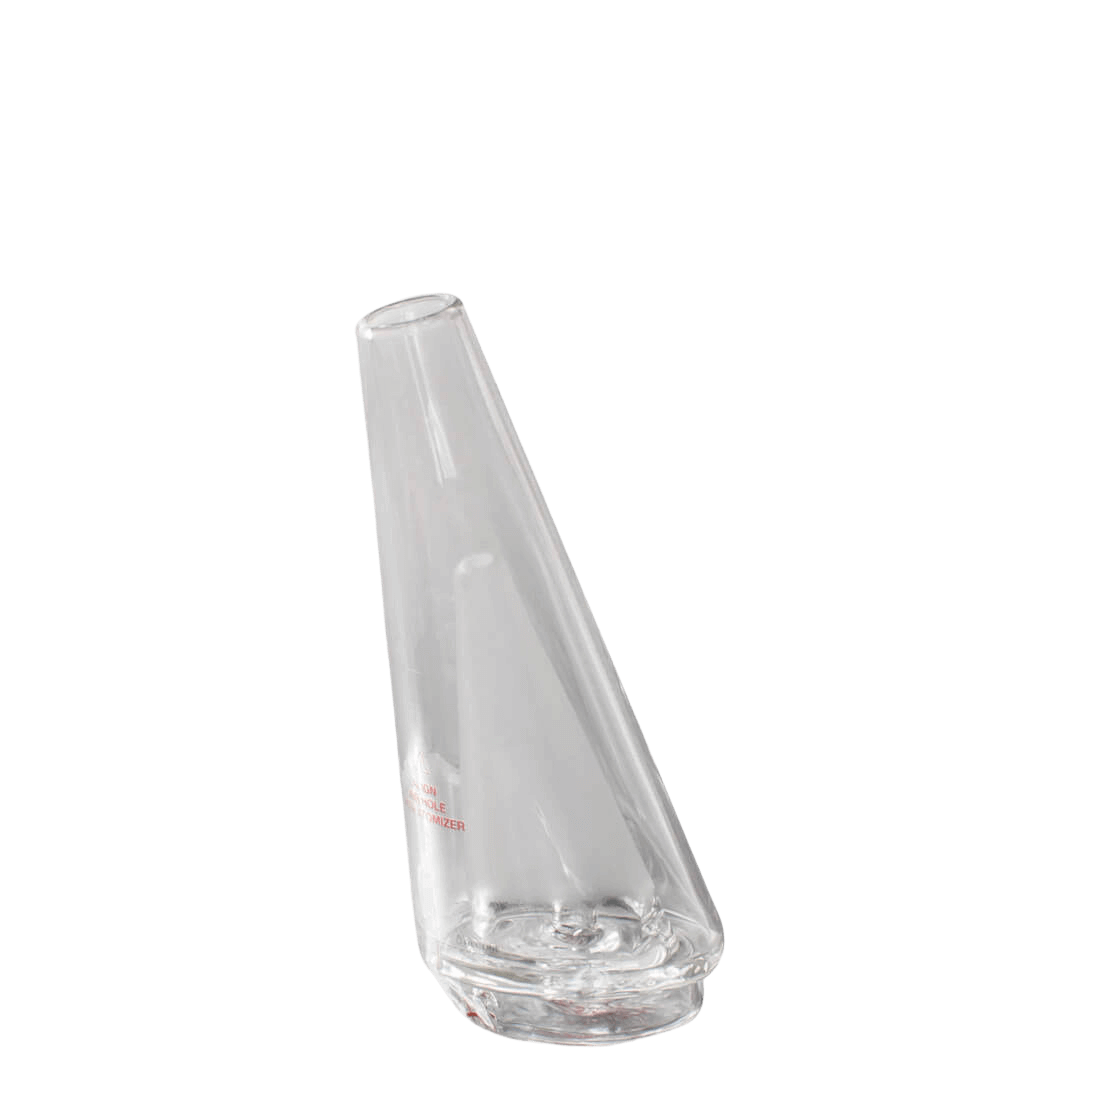 Clear Replacement Glass Attachment for Puffc0 Peak